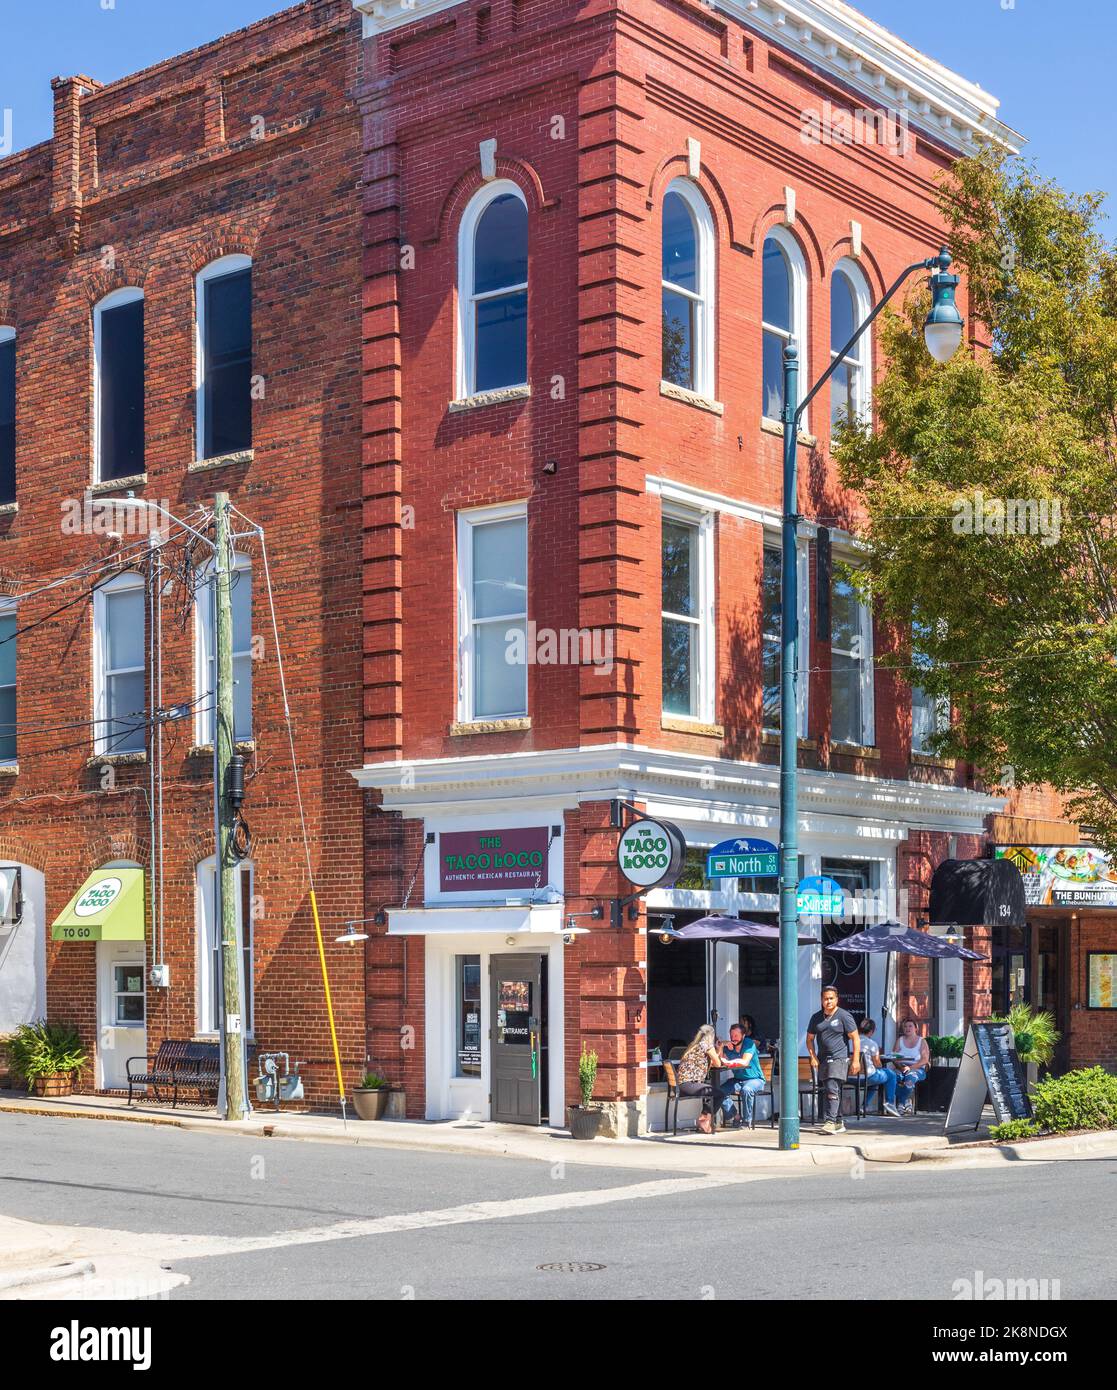 ASHEBORO, NC, USA-26 SEPT 2022: Street corner view of historic building hosing the Taco Loco, showing people seated on sidewalk. Stock Photo